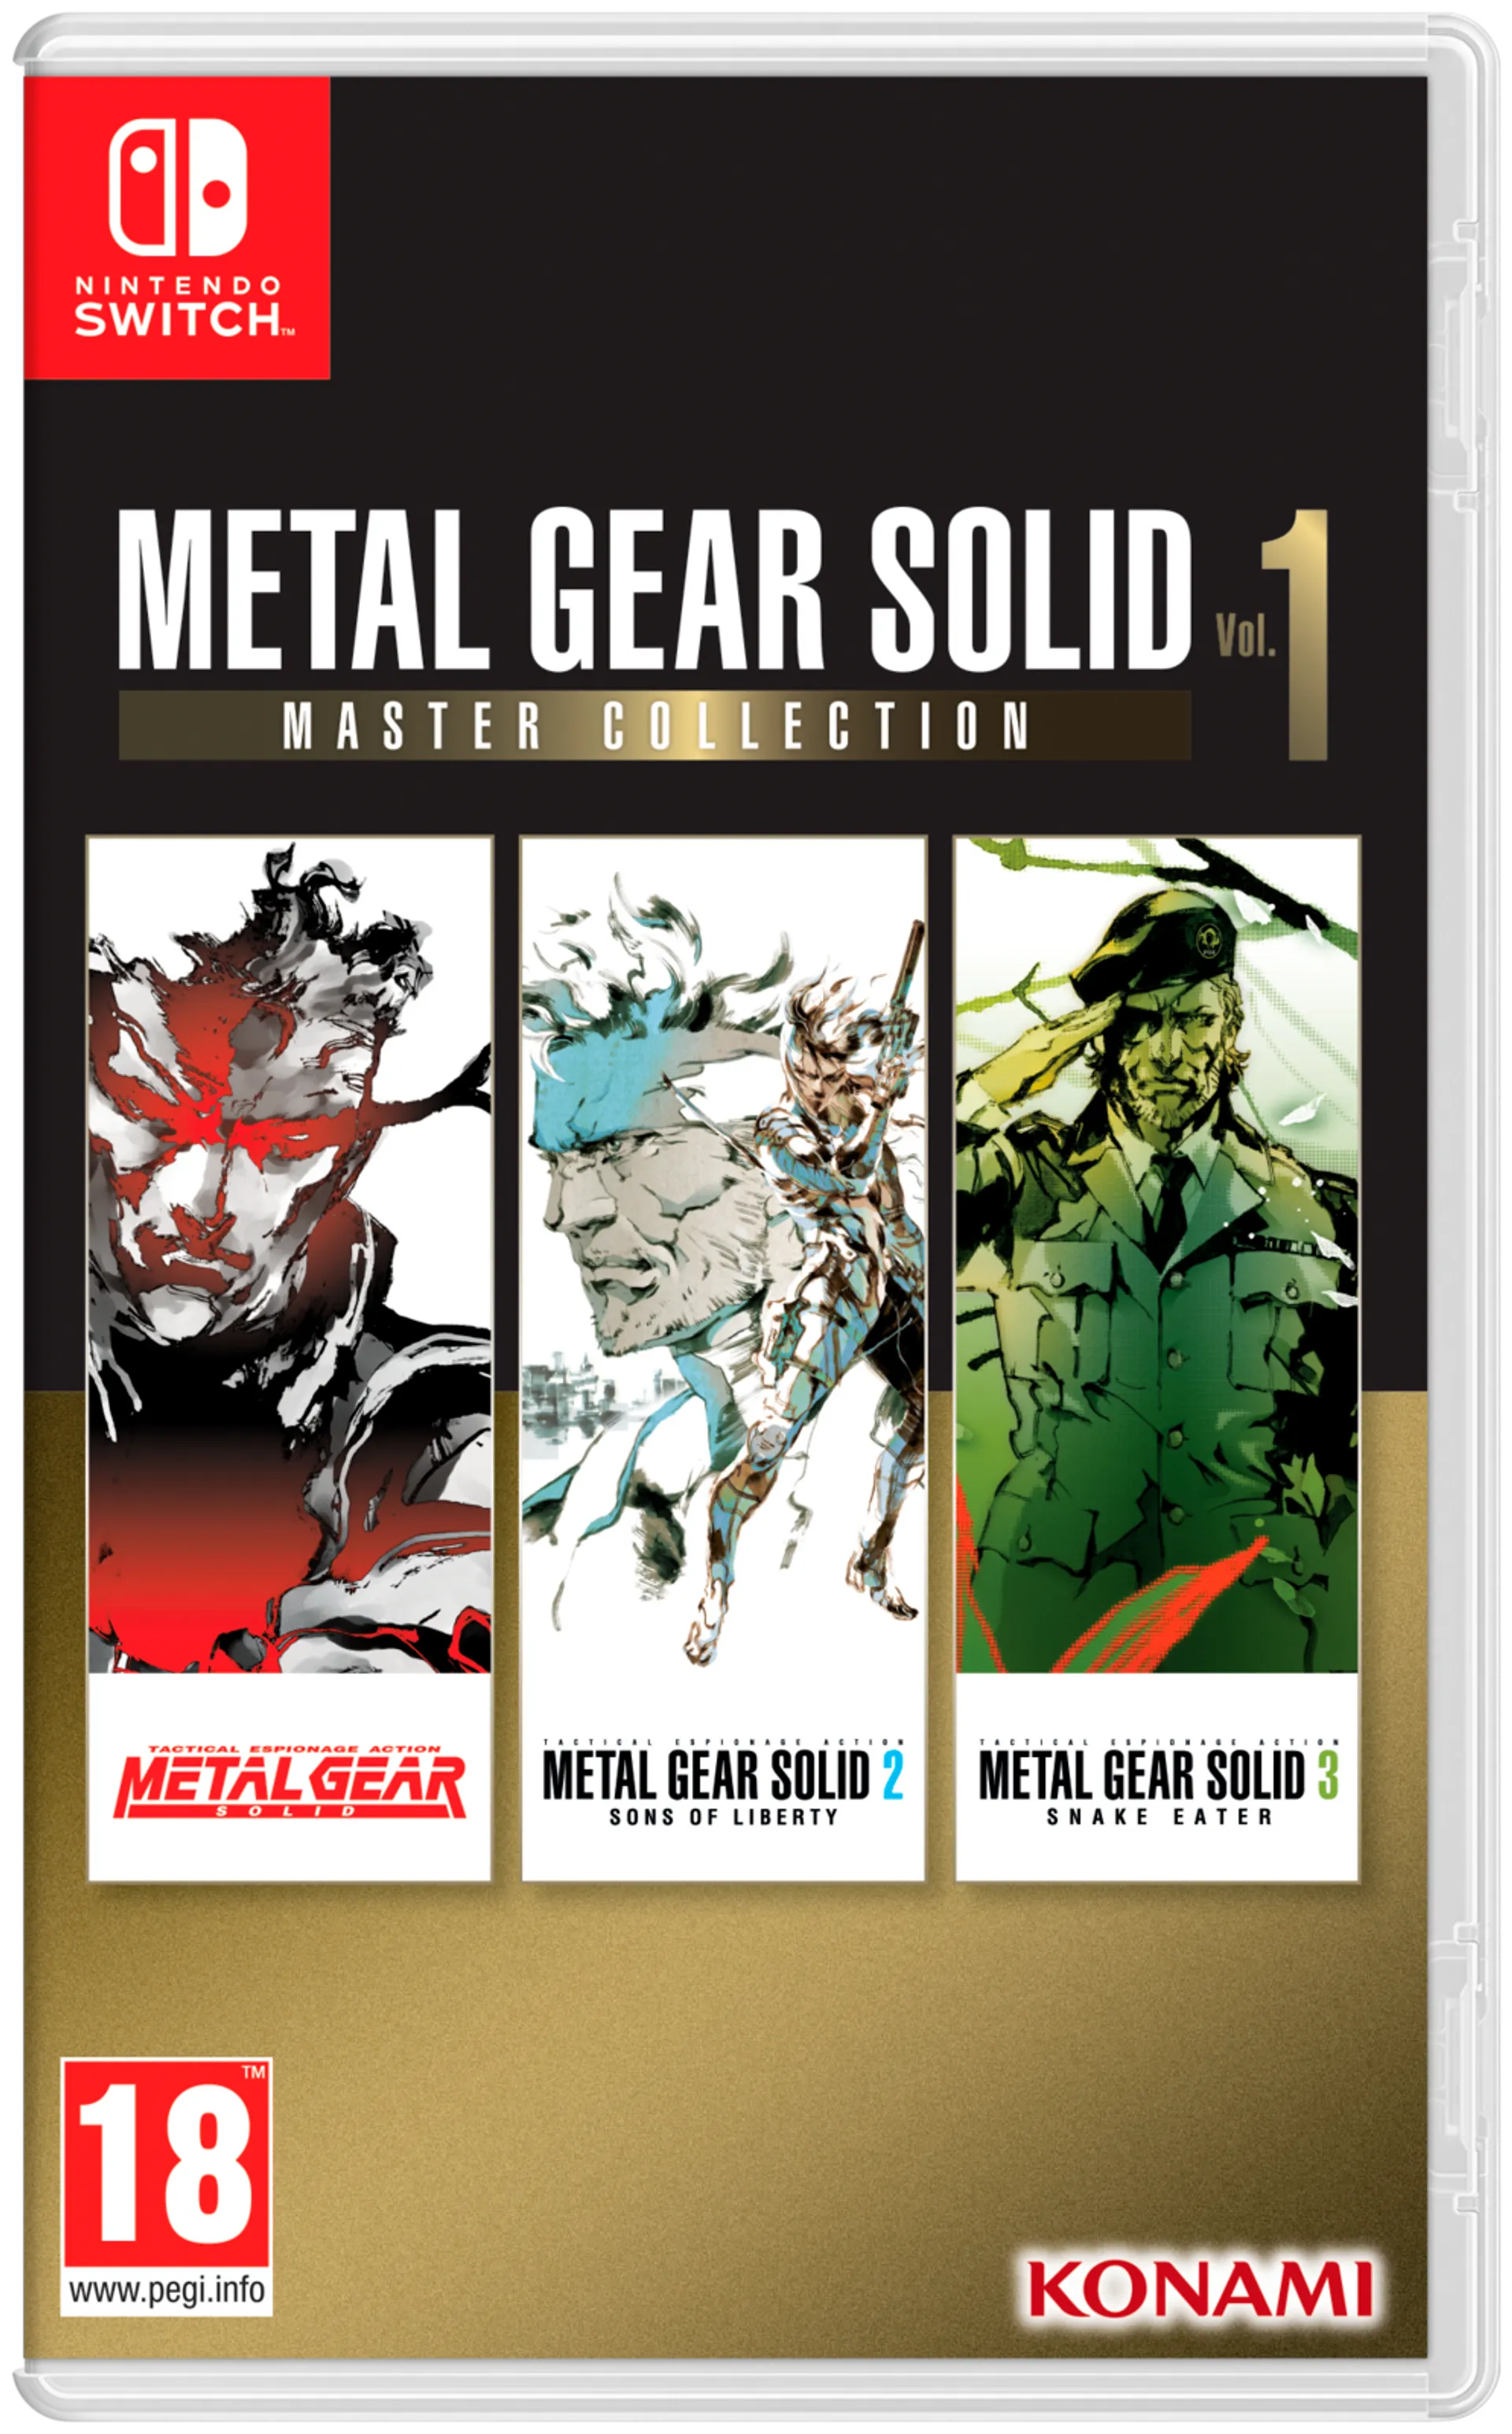 Nintendo Switch Metal Gear Solid Master Collection 1 - 1